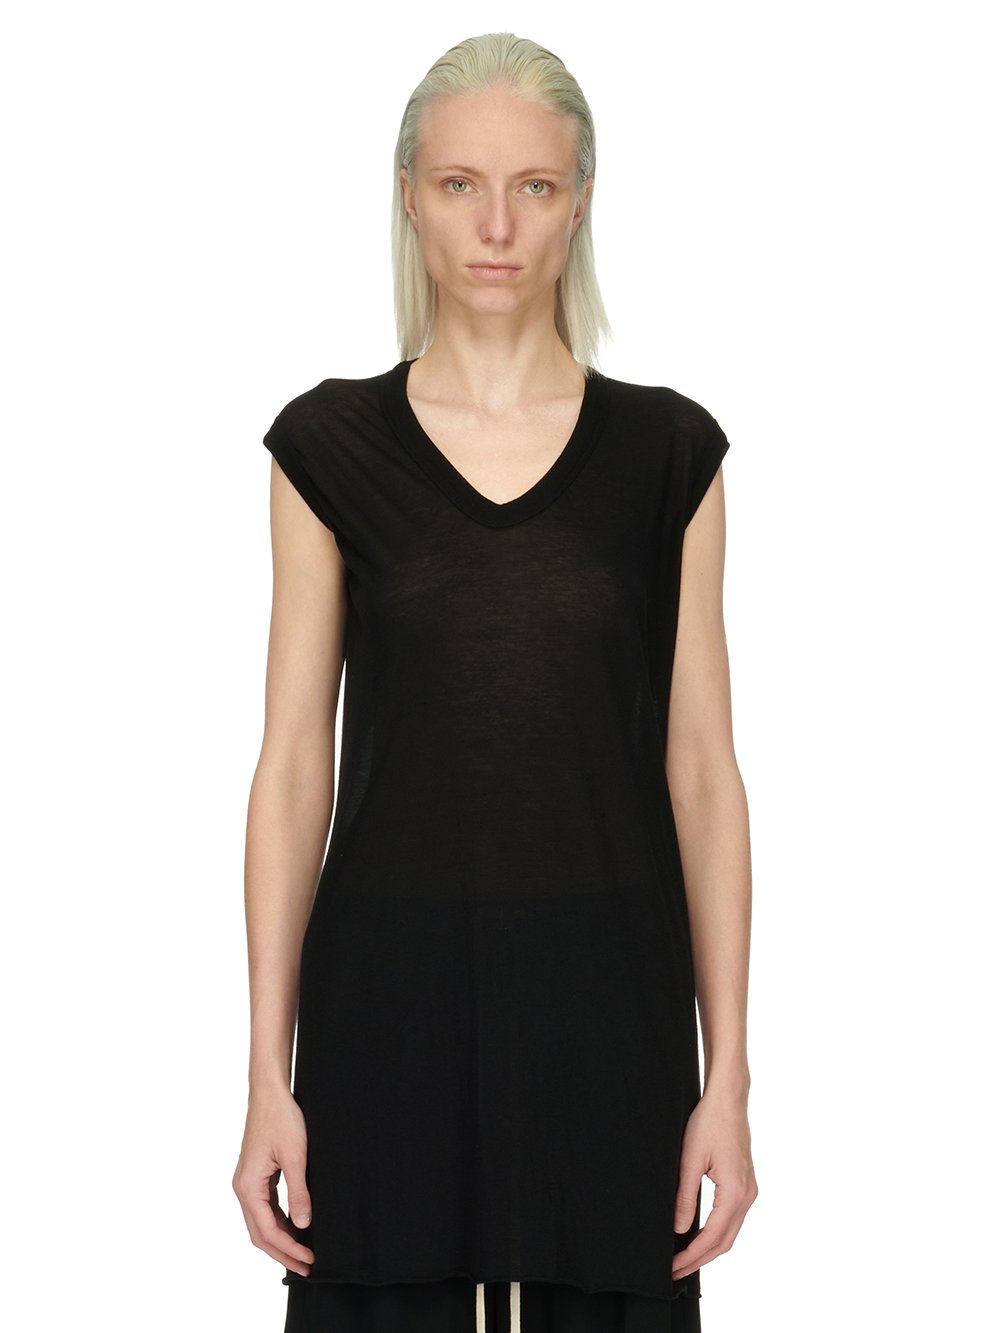 RICK OWENS FOREVER BASIC SL T IN BLACK UNSTABLE COTTON